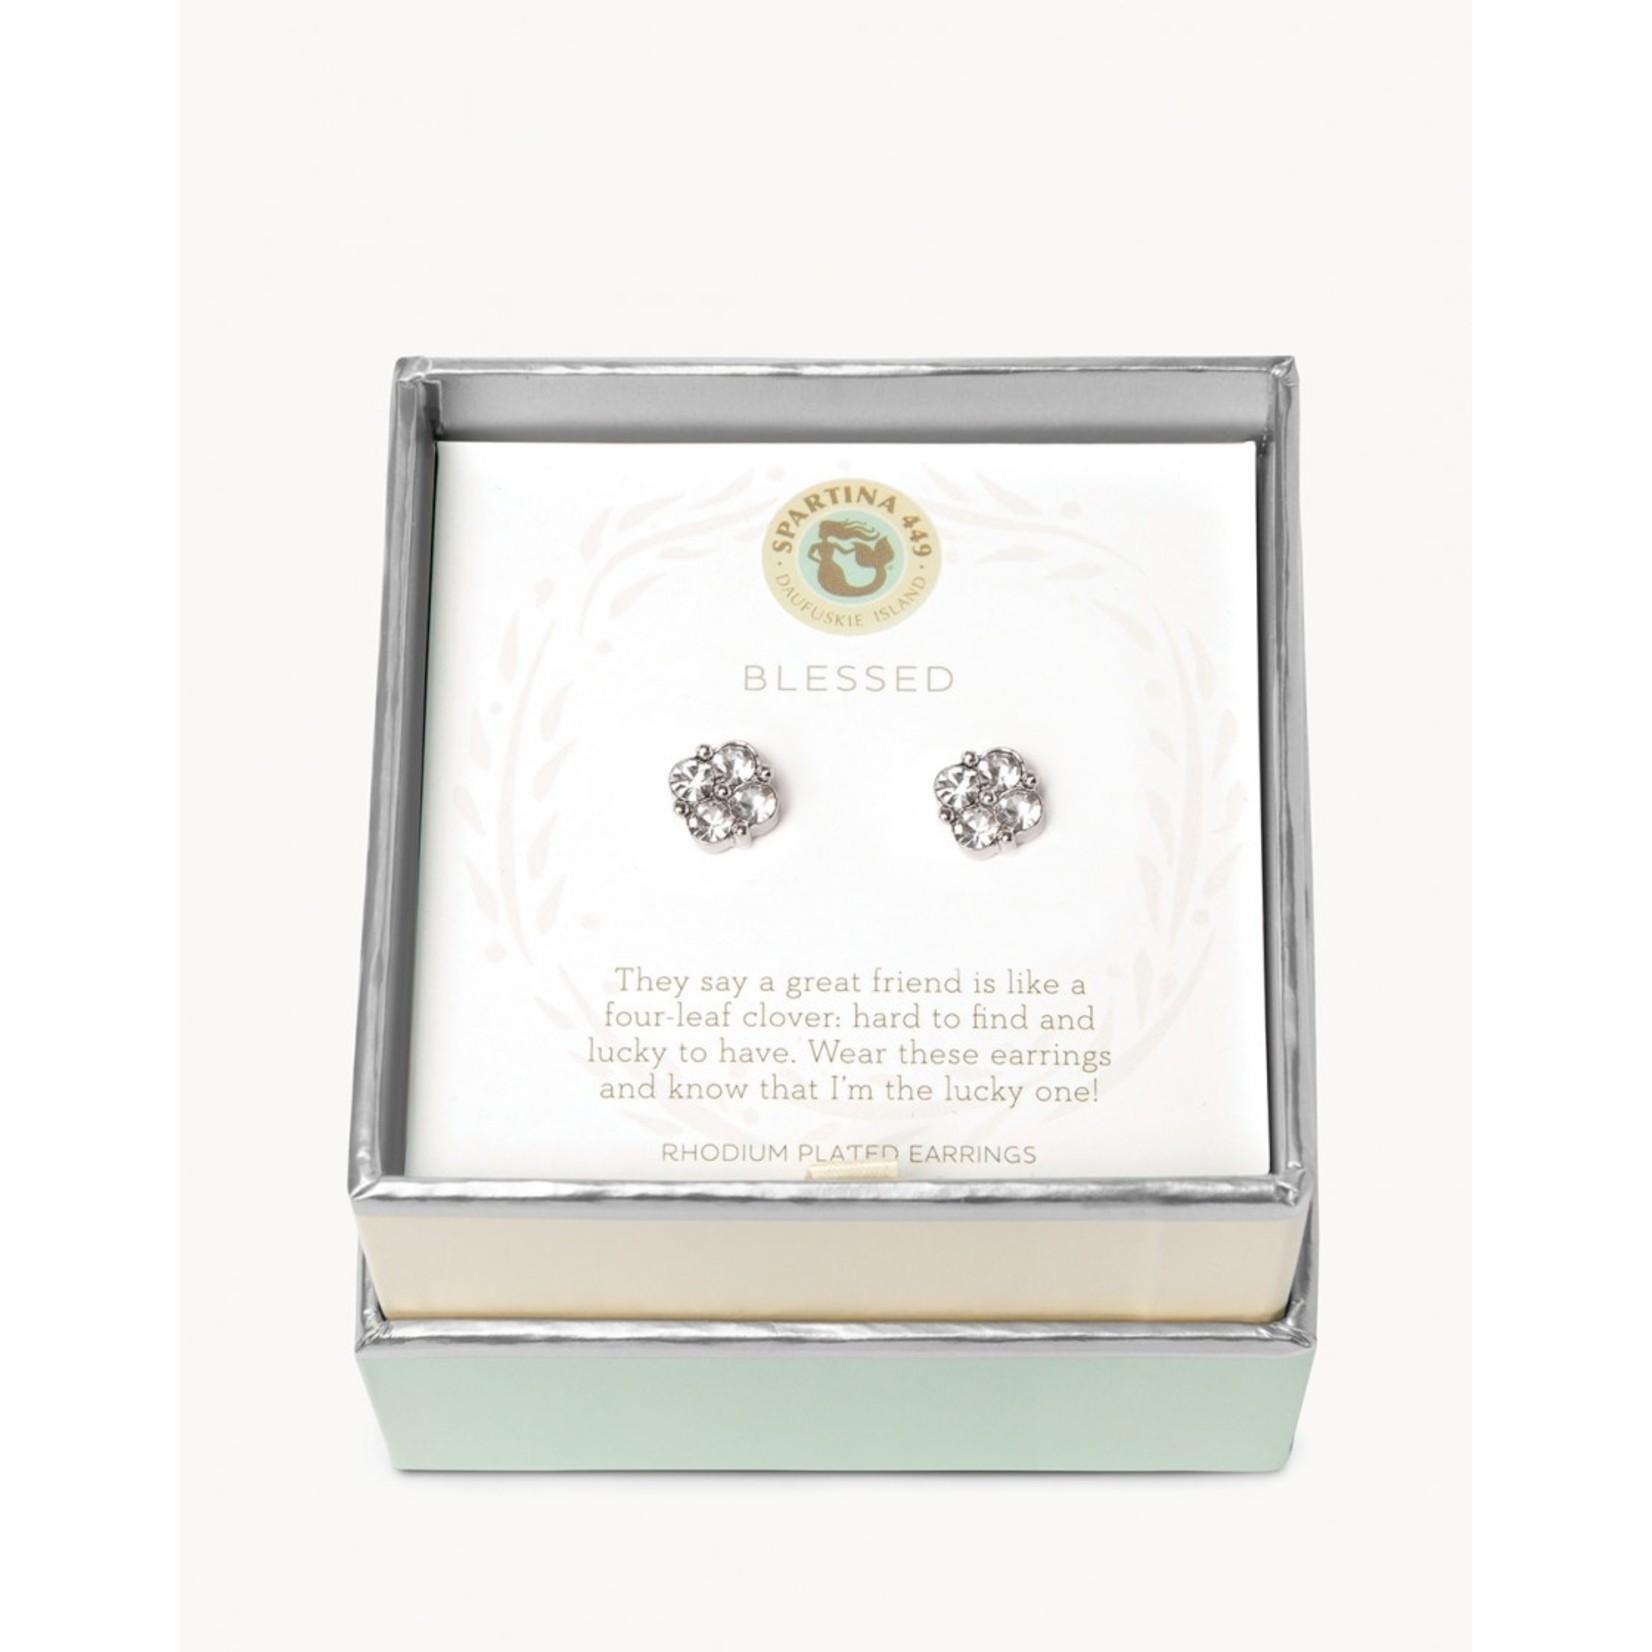 Spartina Spartina Sea La Vie Stud Earrings Blessed/Crystal Clover - Silver